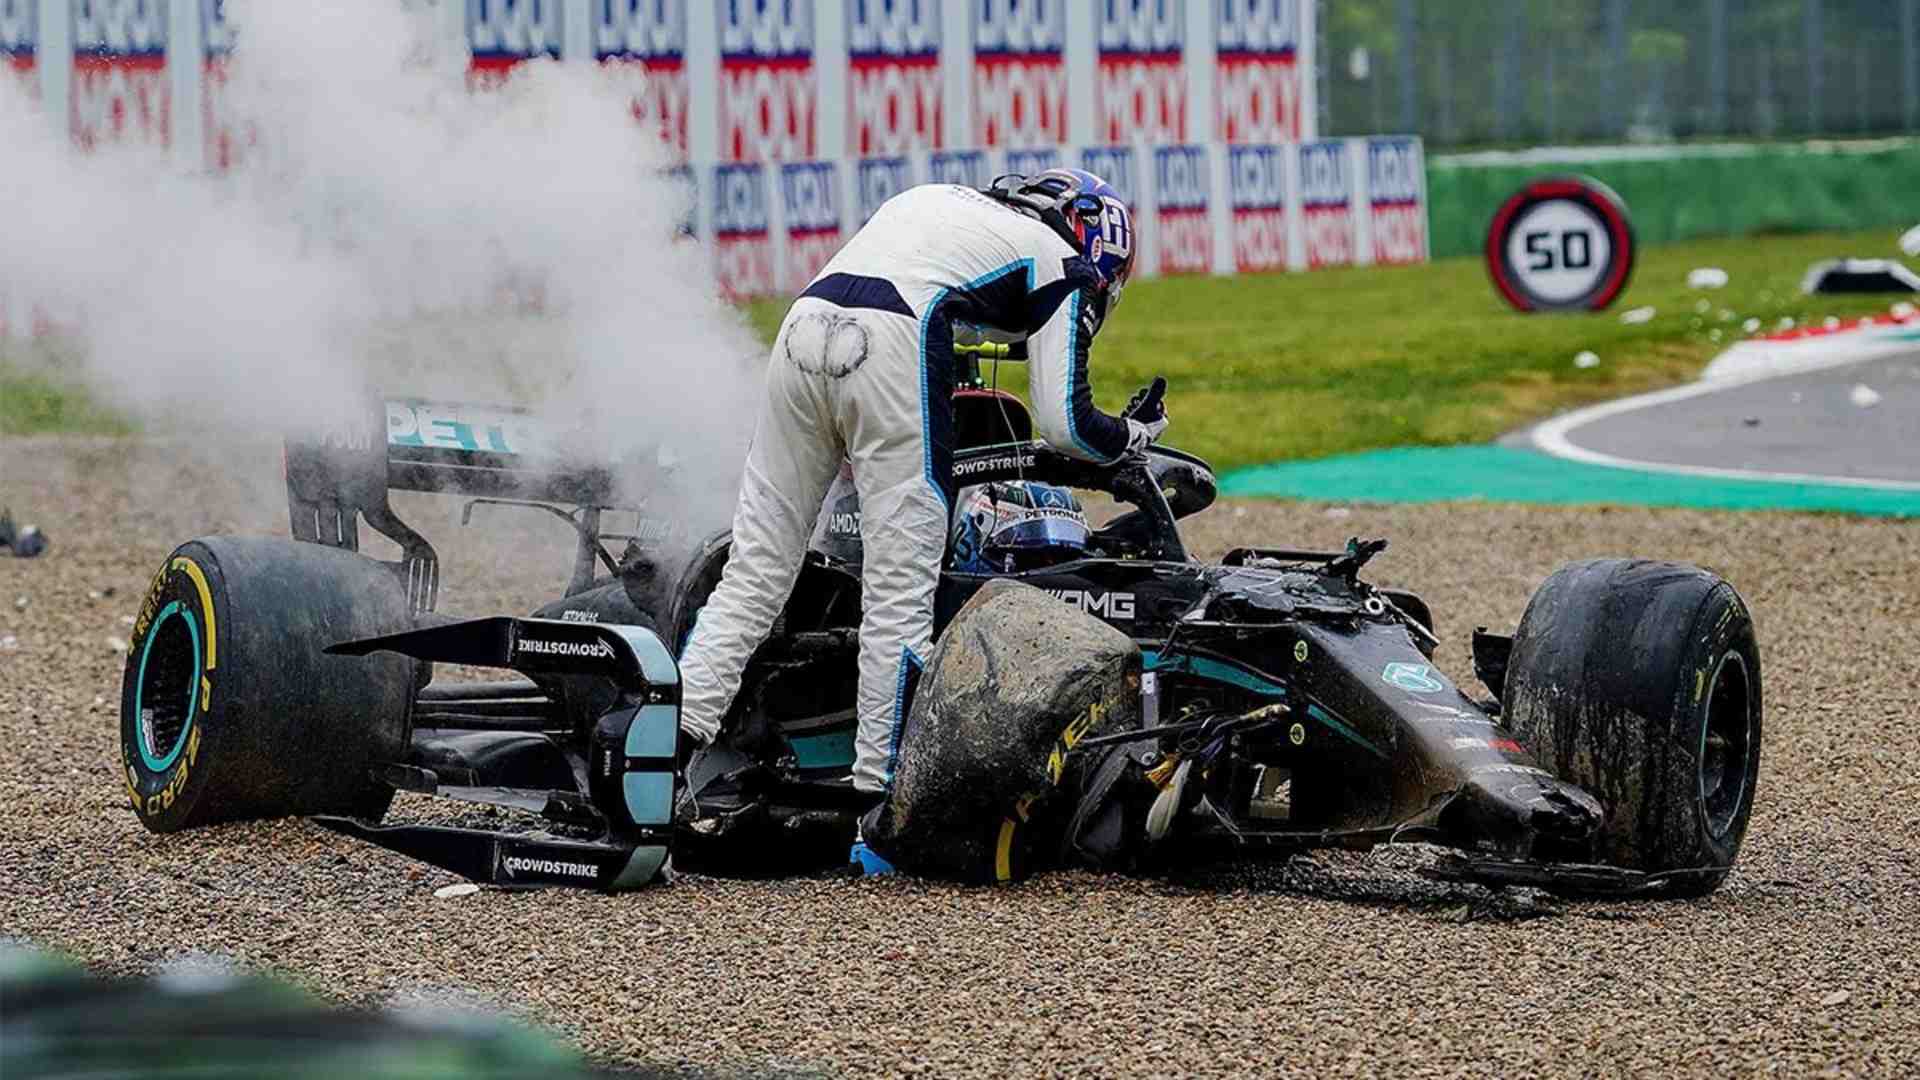 George Russell (in white) argues with Valtteri Bottas after they crashed at Imola. (Image: Twitter)